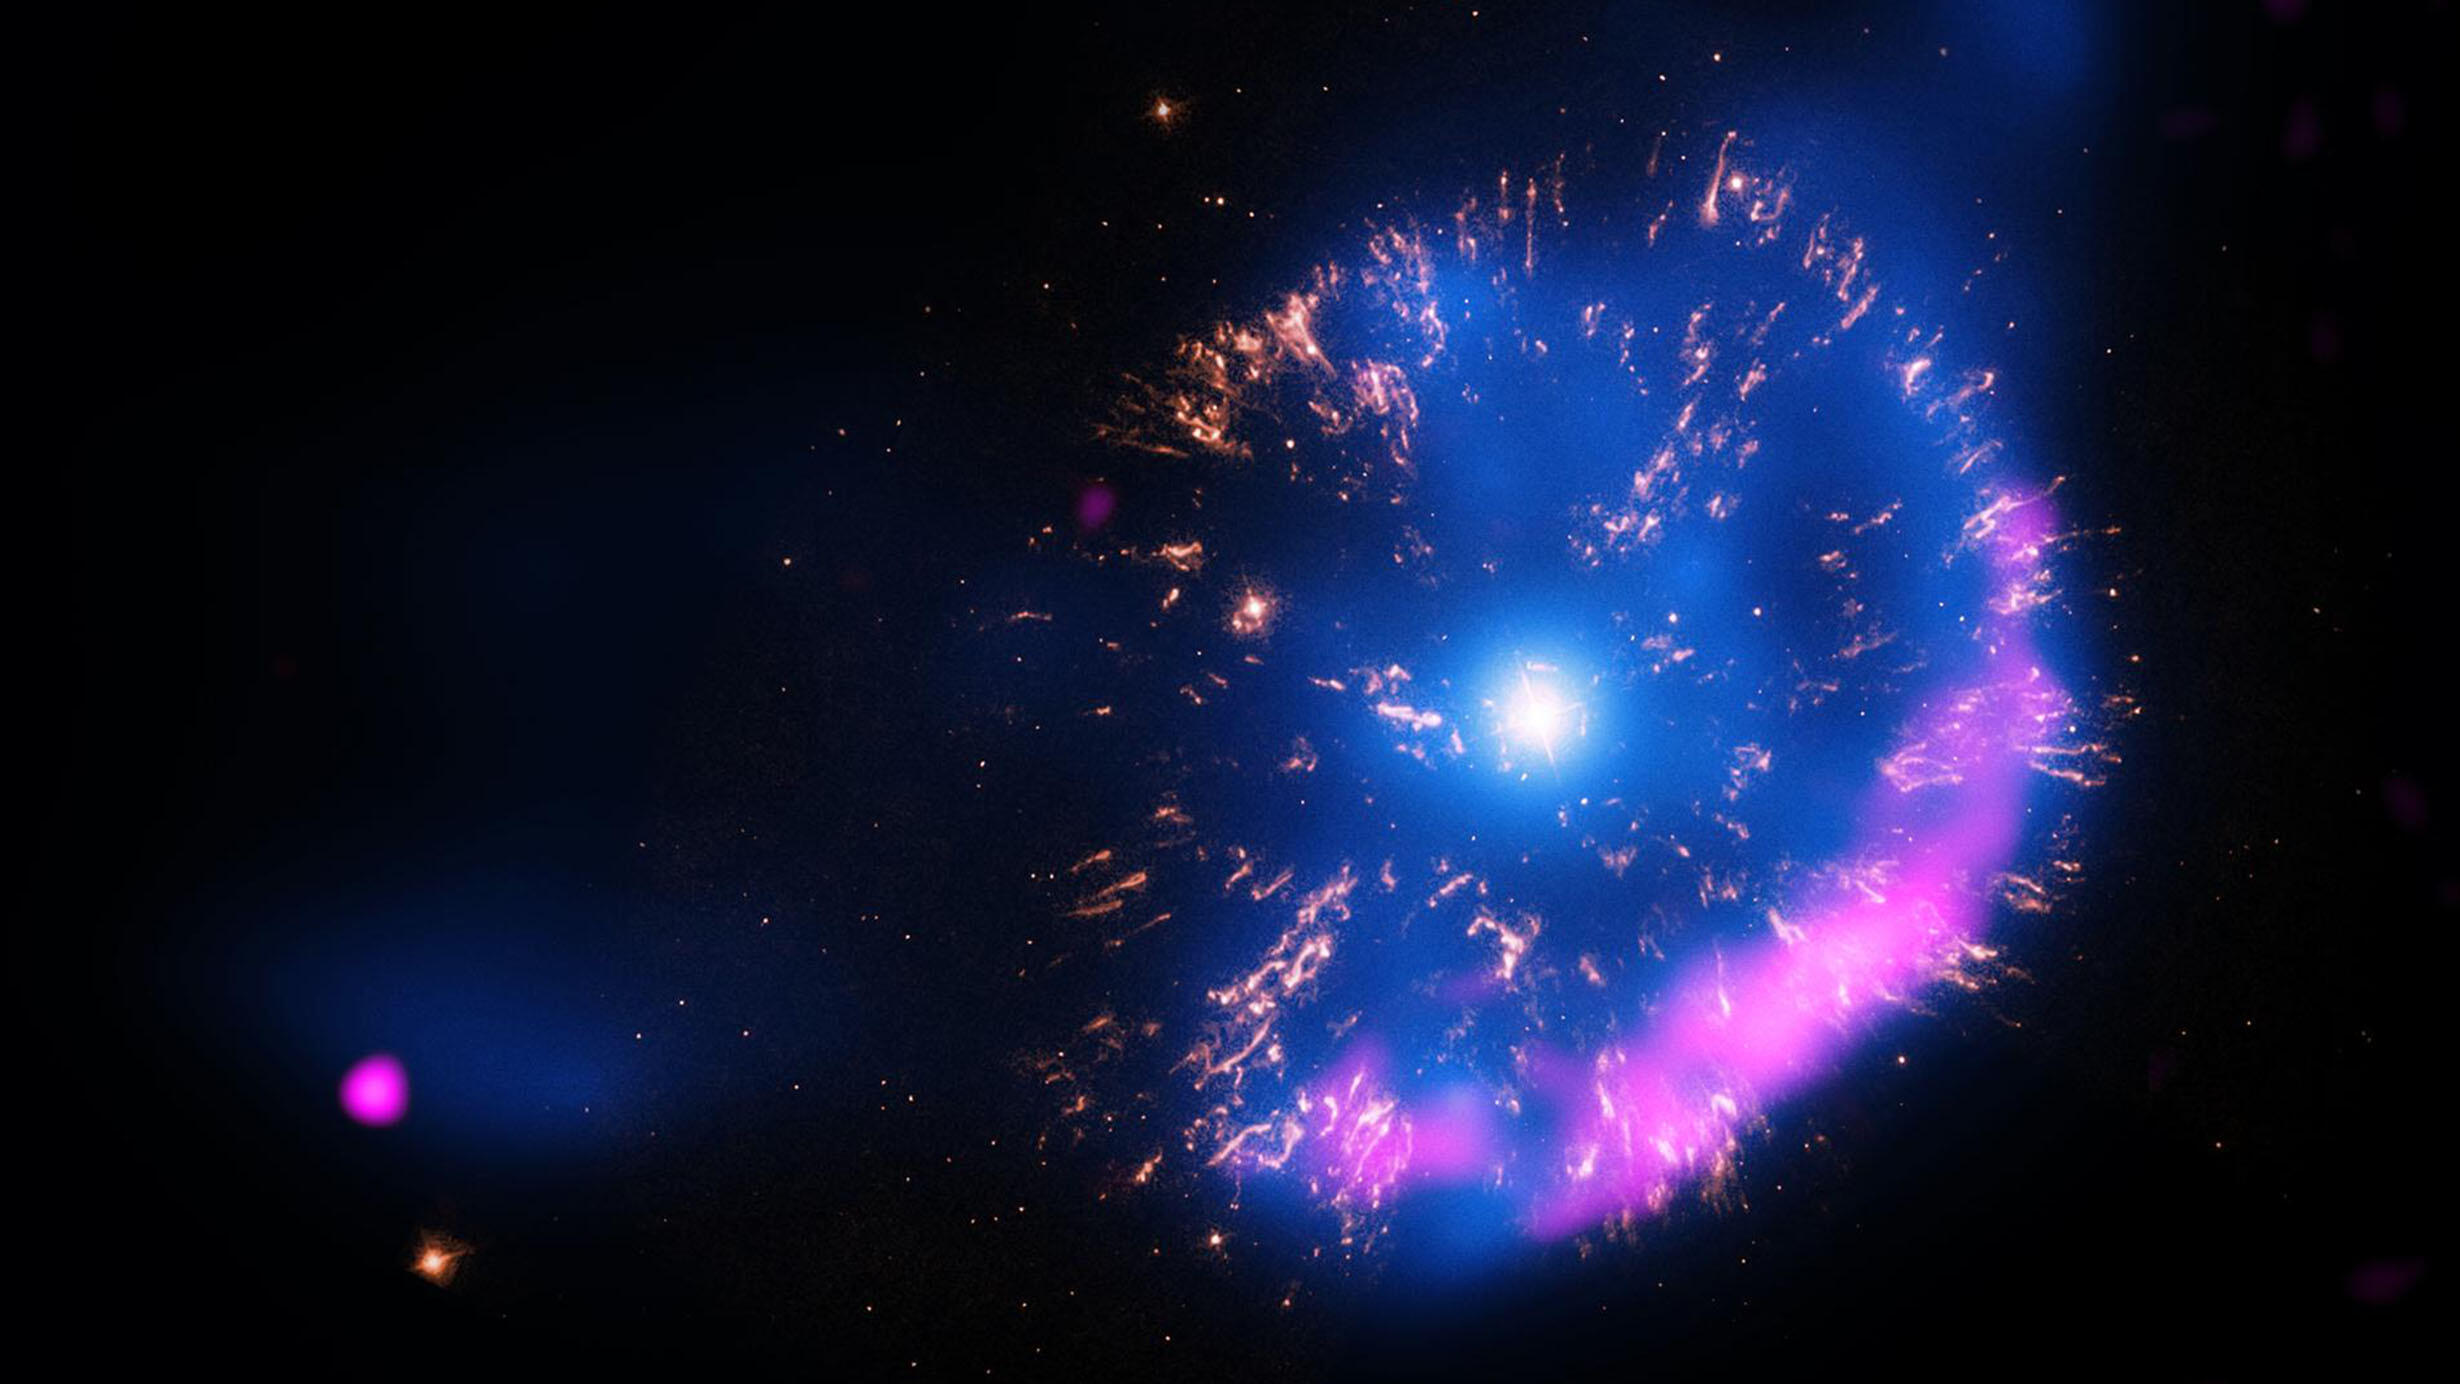 Stella explosion resembles fireworks in space.